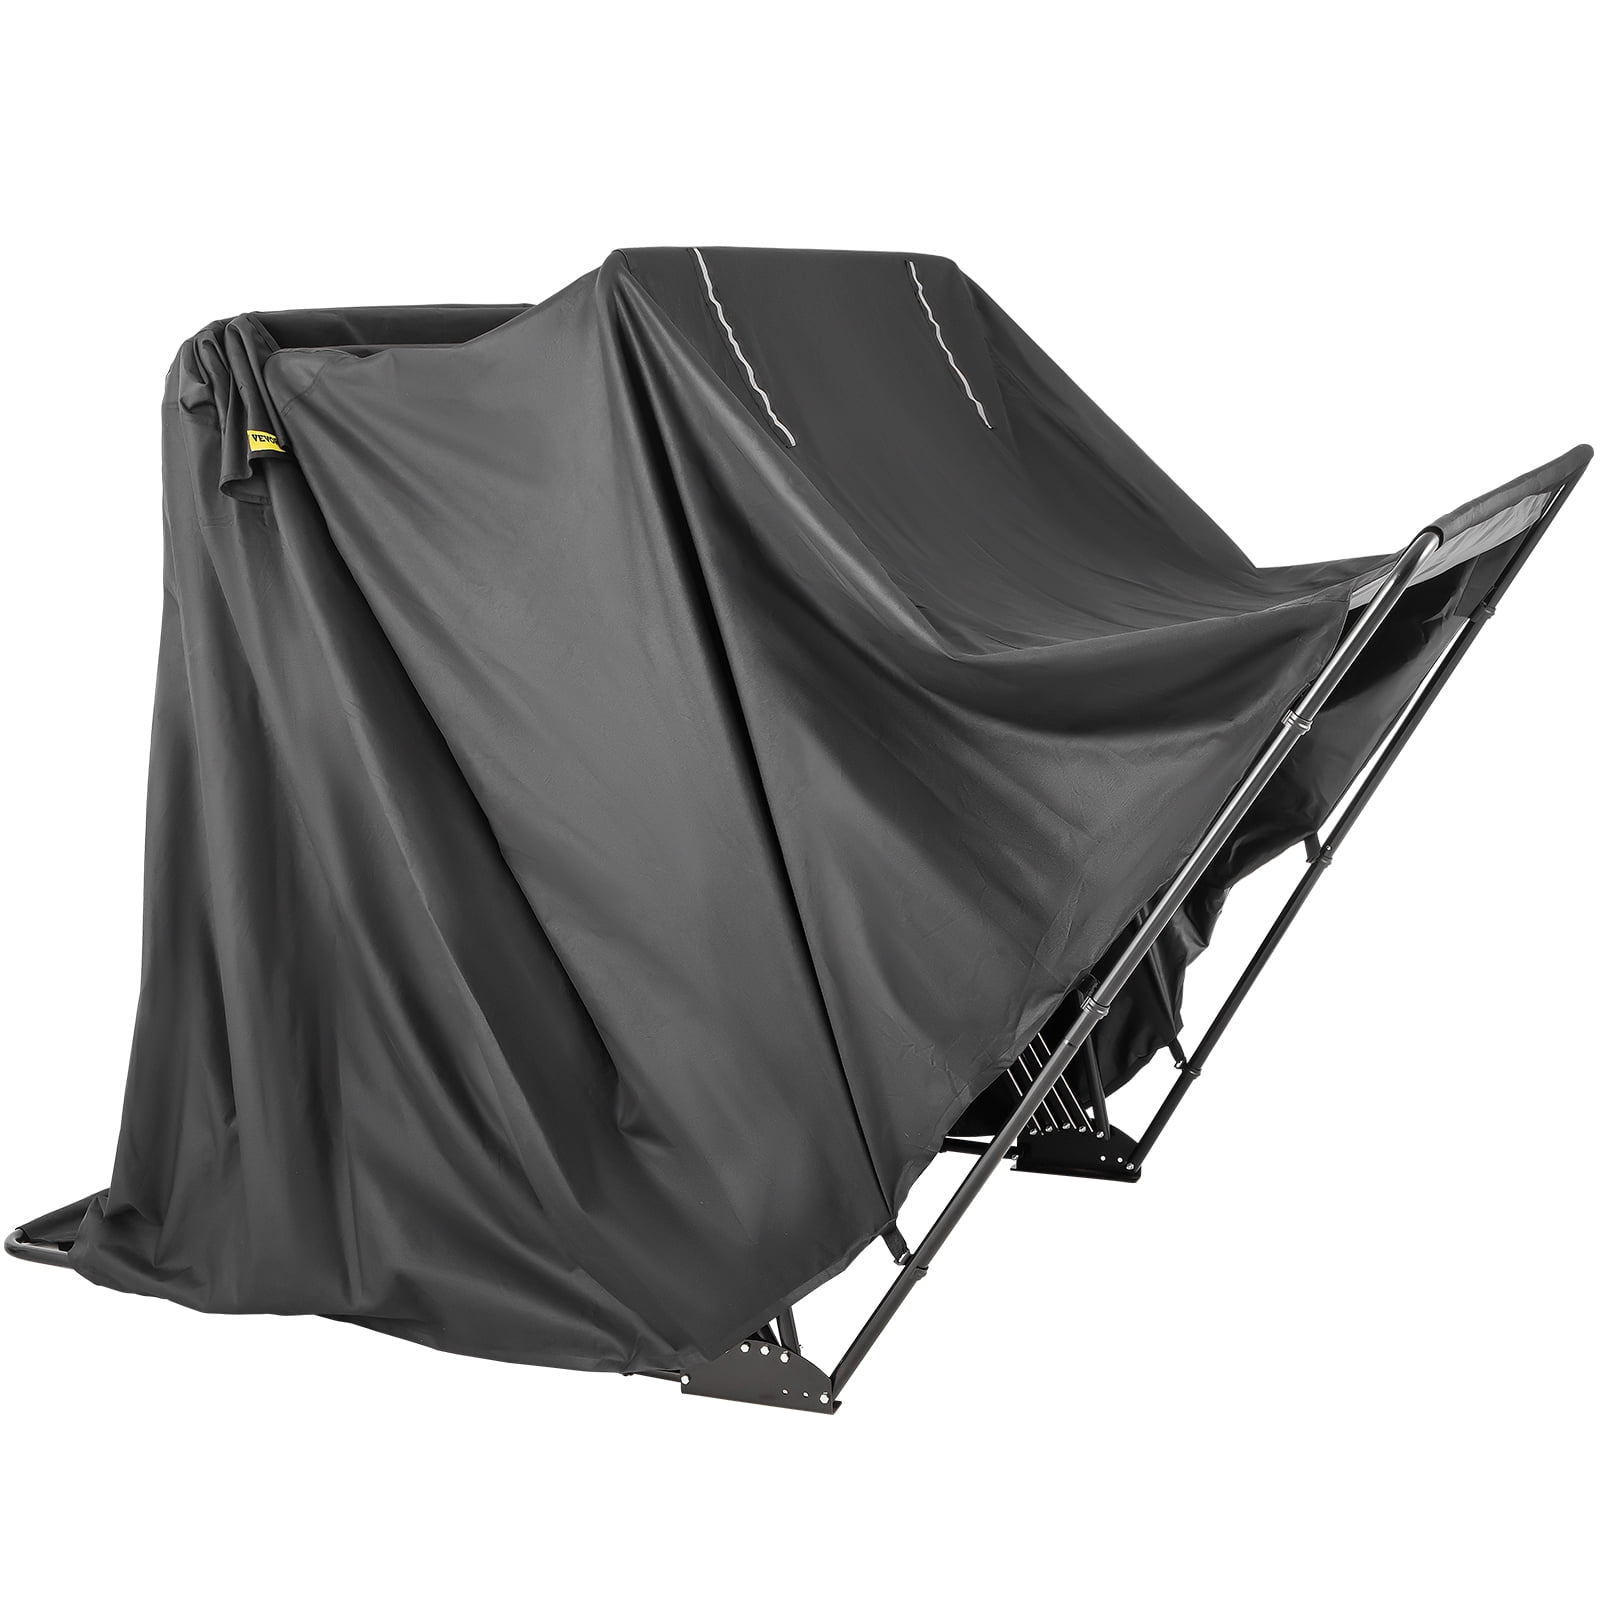 VEVOR Motorcycle Shelter, Waterproof Motorcycle Cover, Heavy Duty Motorcycle Shelter Shed, 600D Oxford Motorbike Shed Anti-UV, 133.9x53.9x76.8 inch